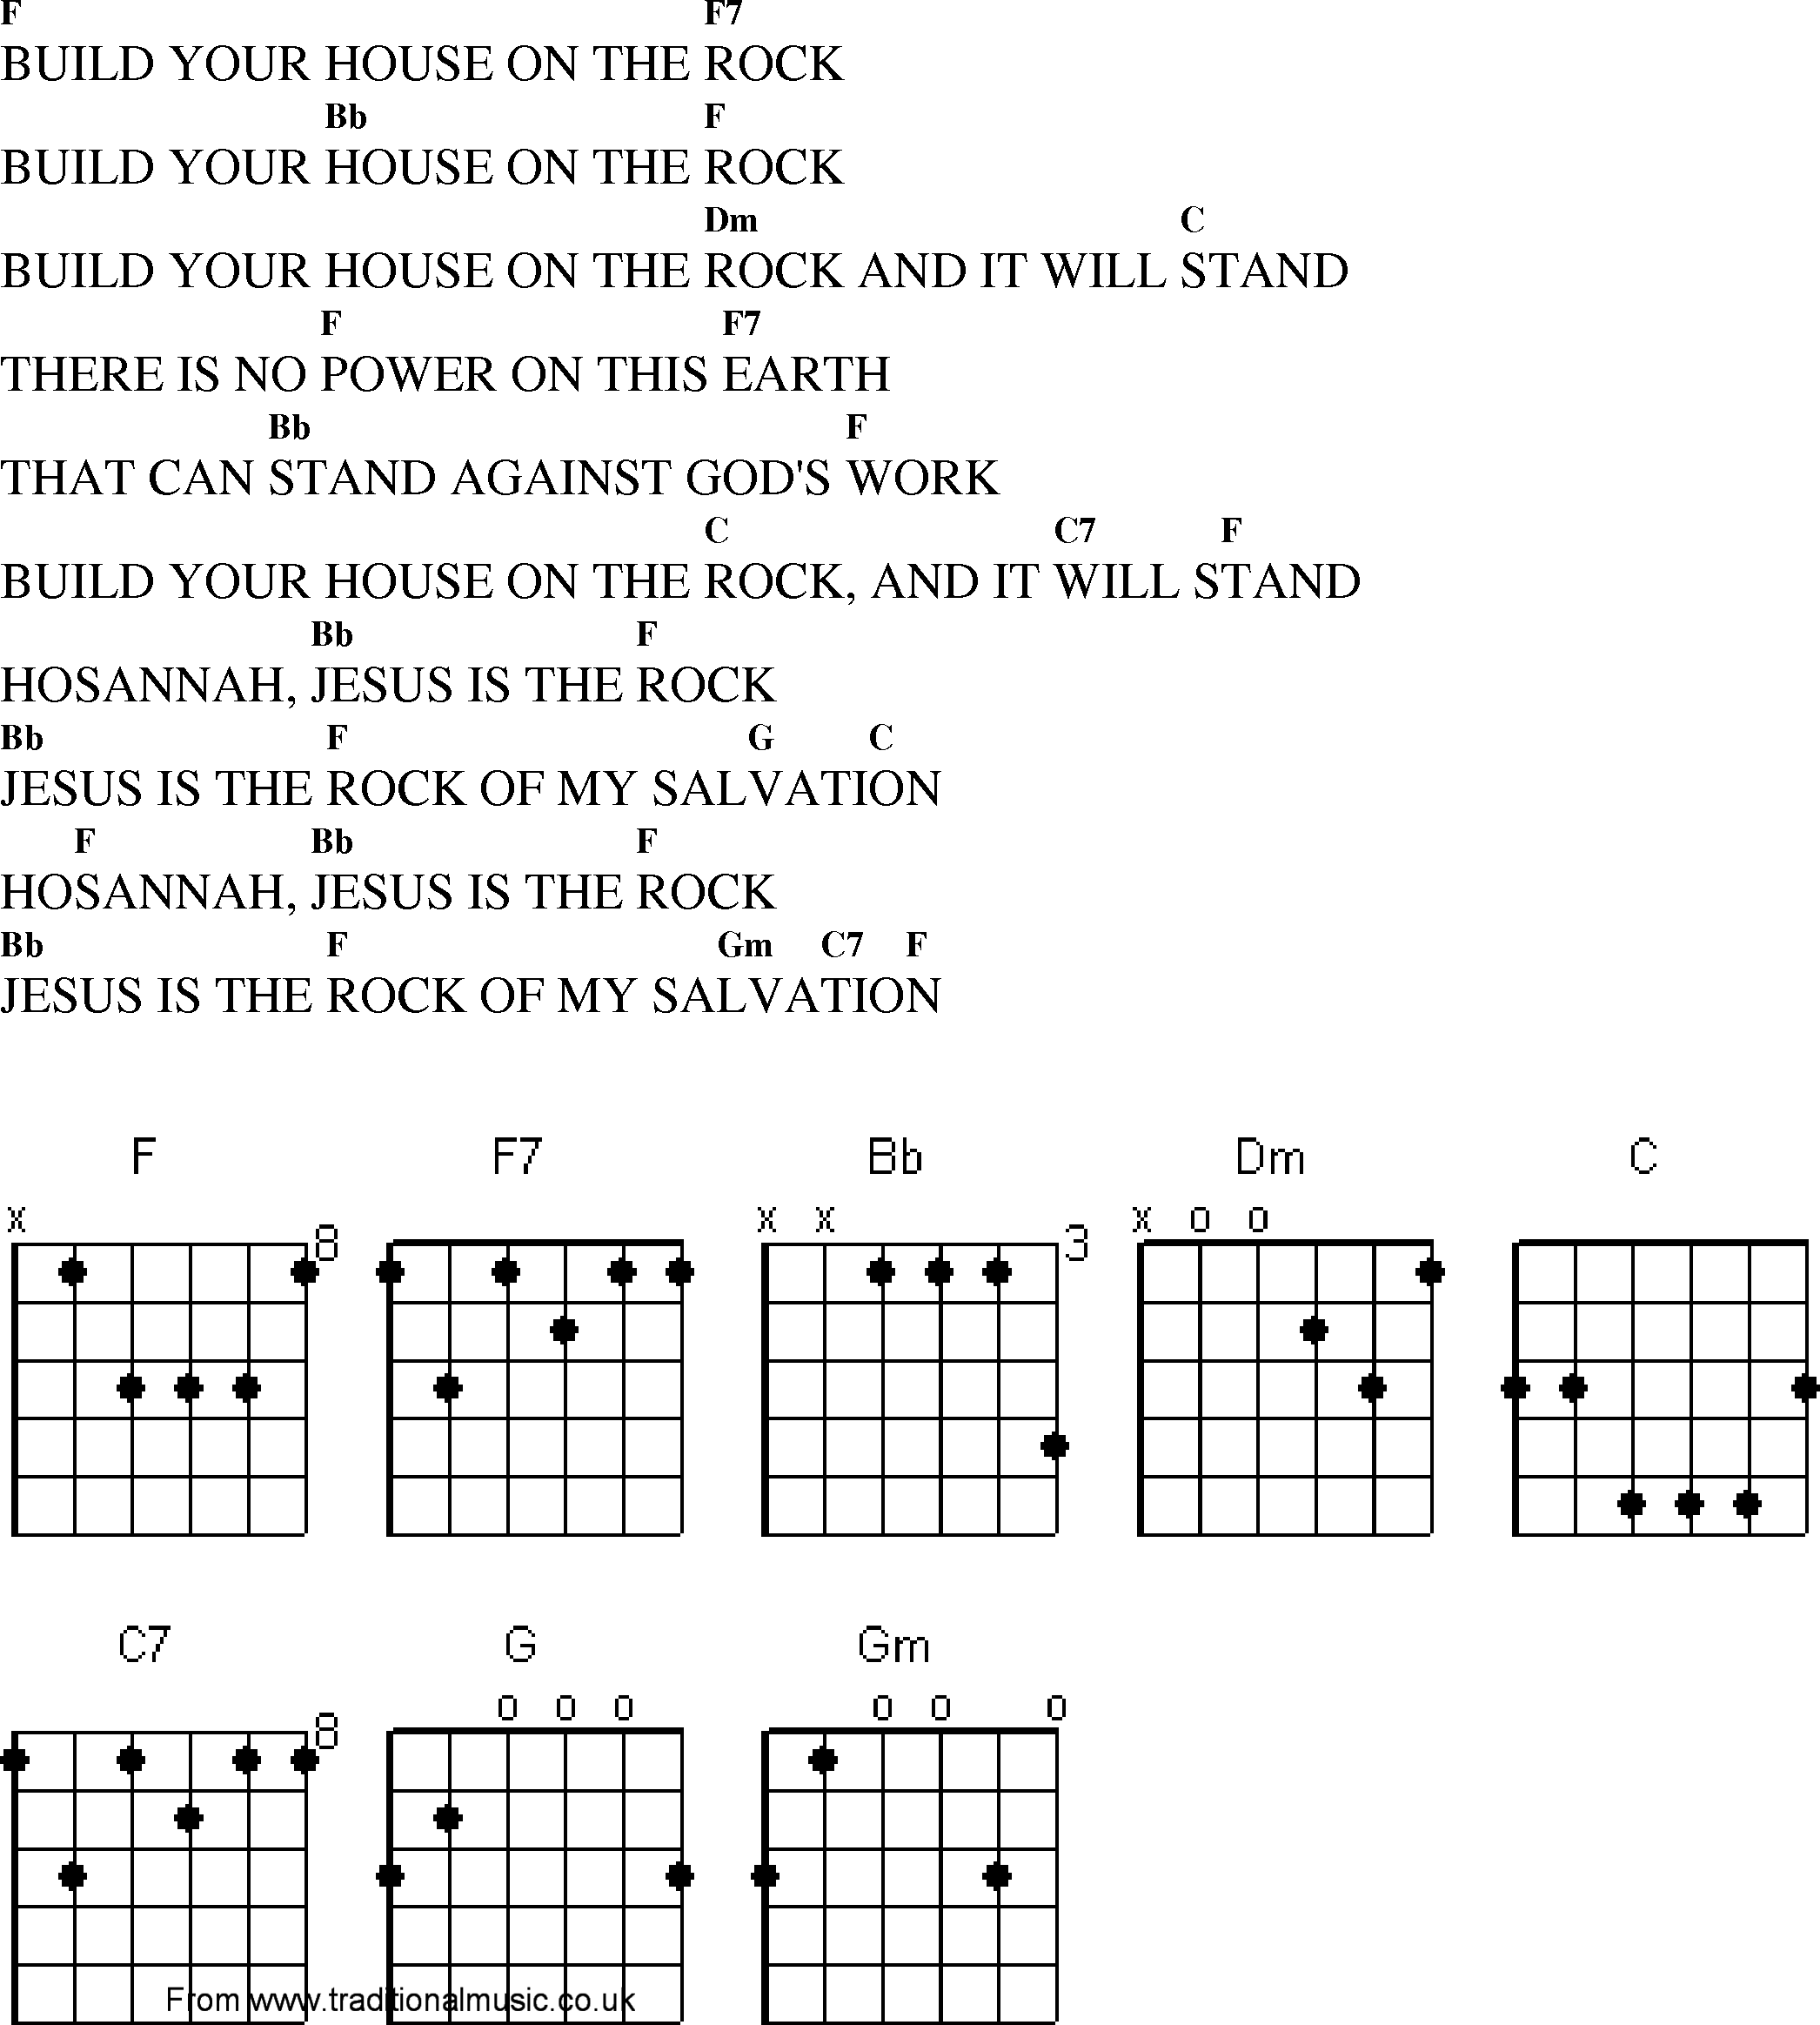 Gospel Song: buil_your_house_on_the_rock, lyrics and chords.